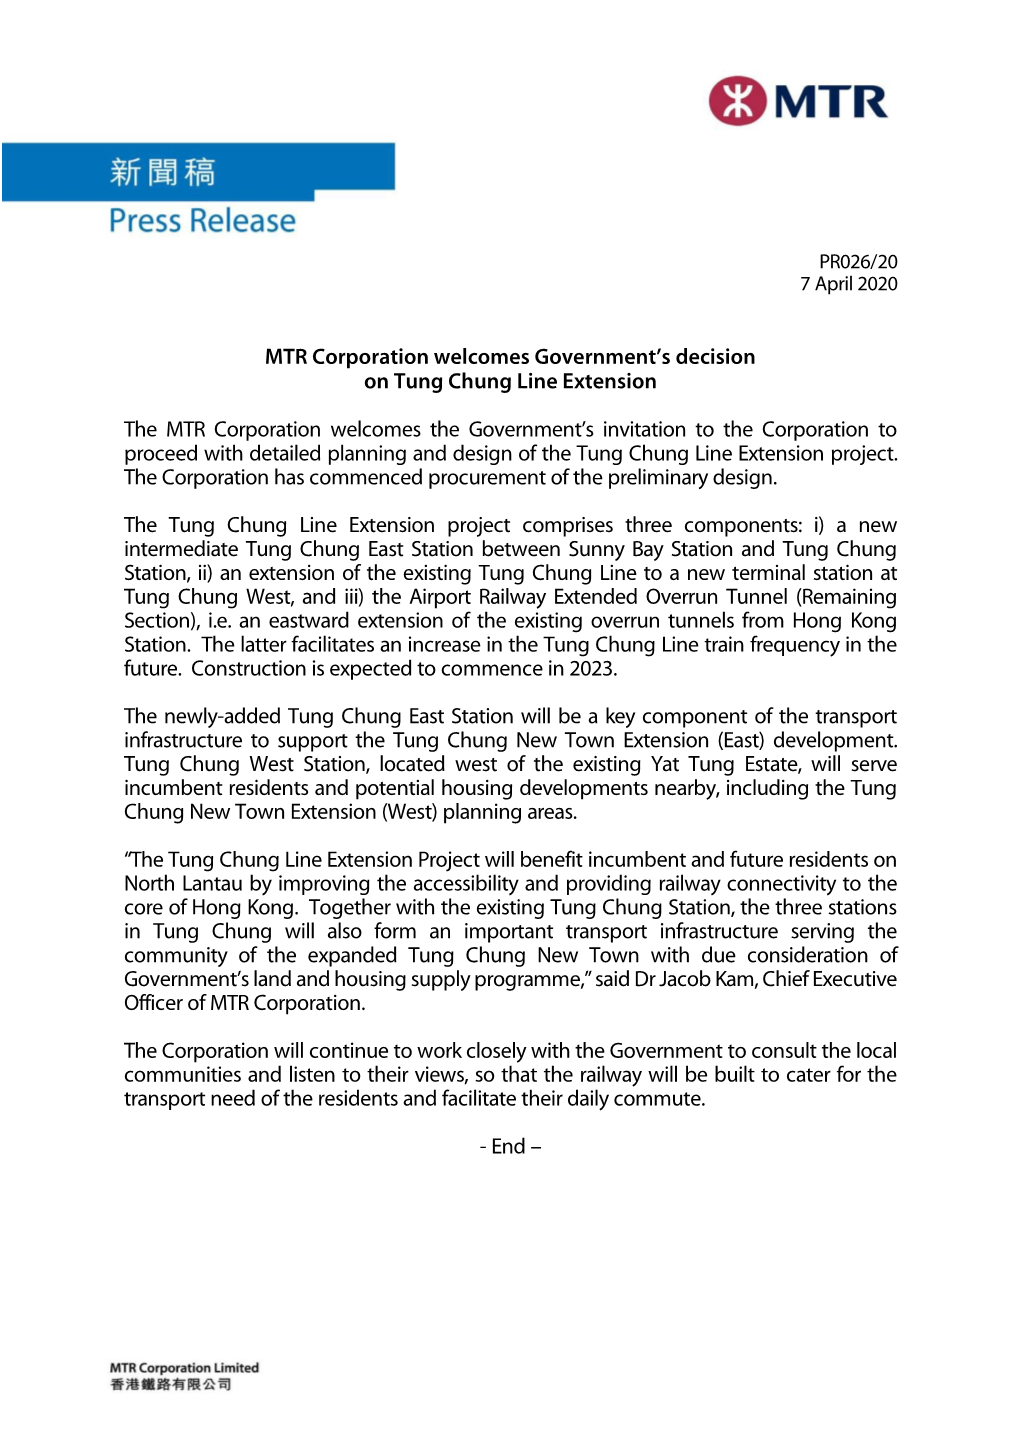 MTR Corporation Welcomes Government's Decision on Tung Chung Line Extension the MTR Corporation Welcomes the Government's I